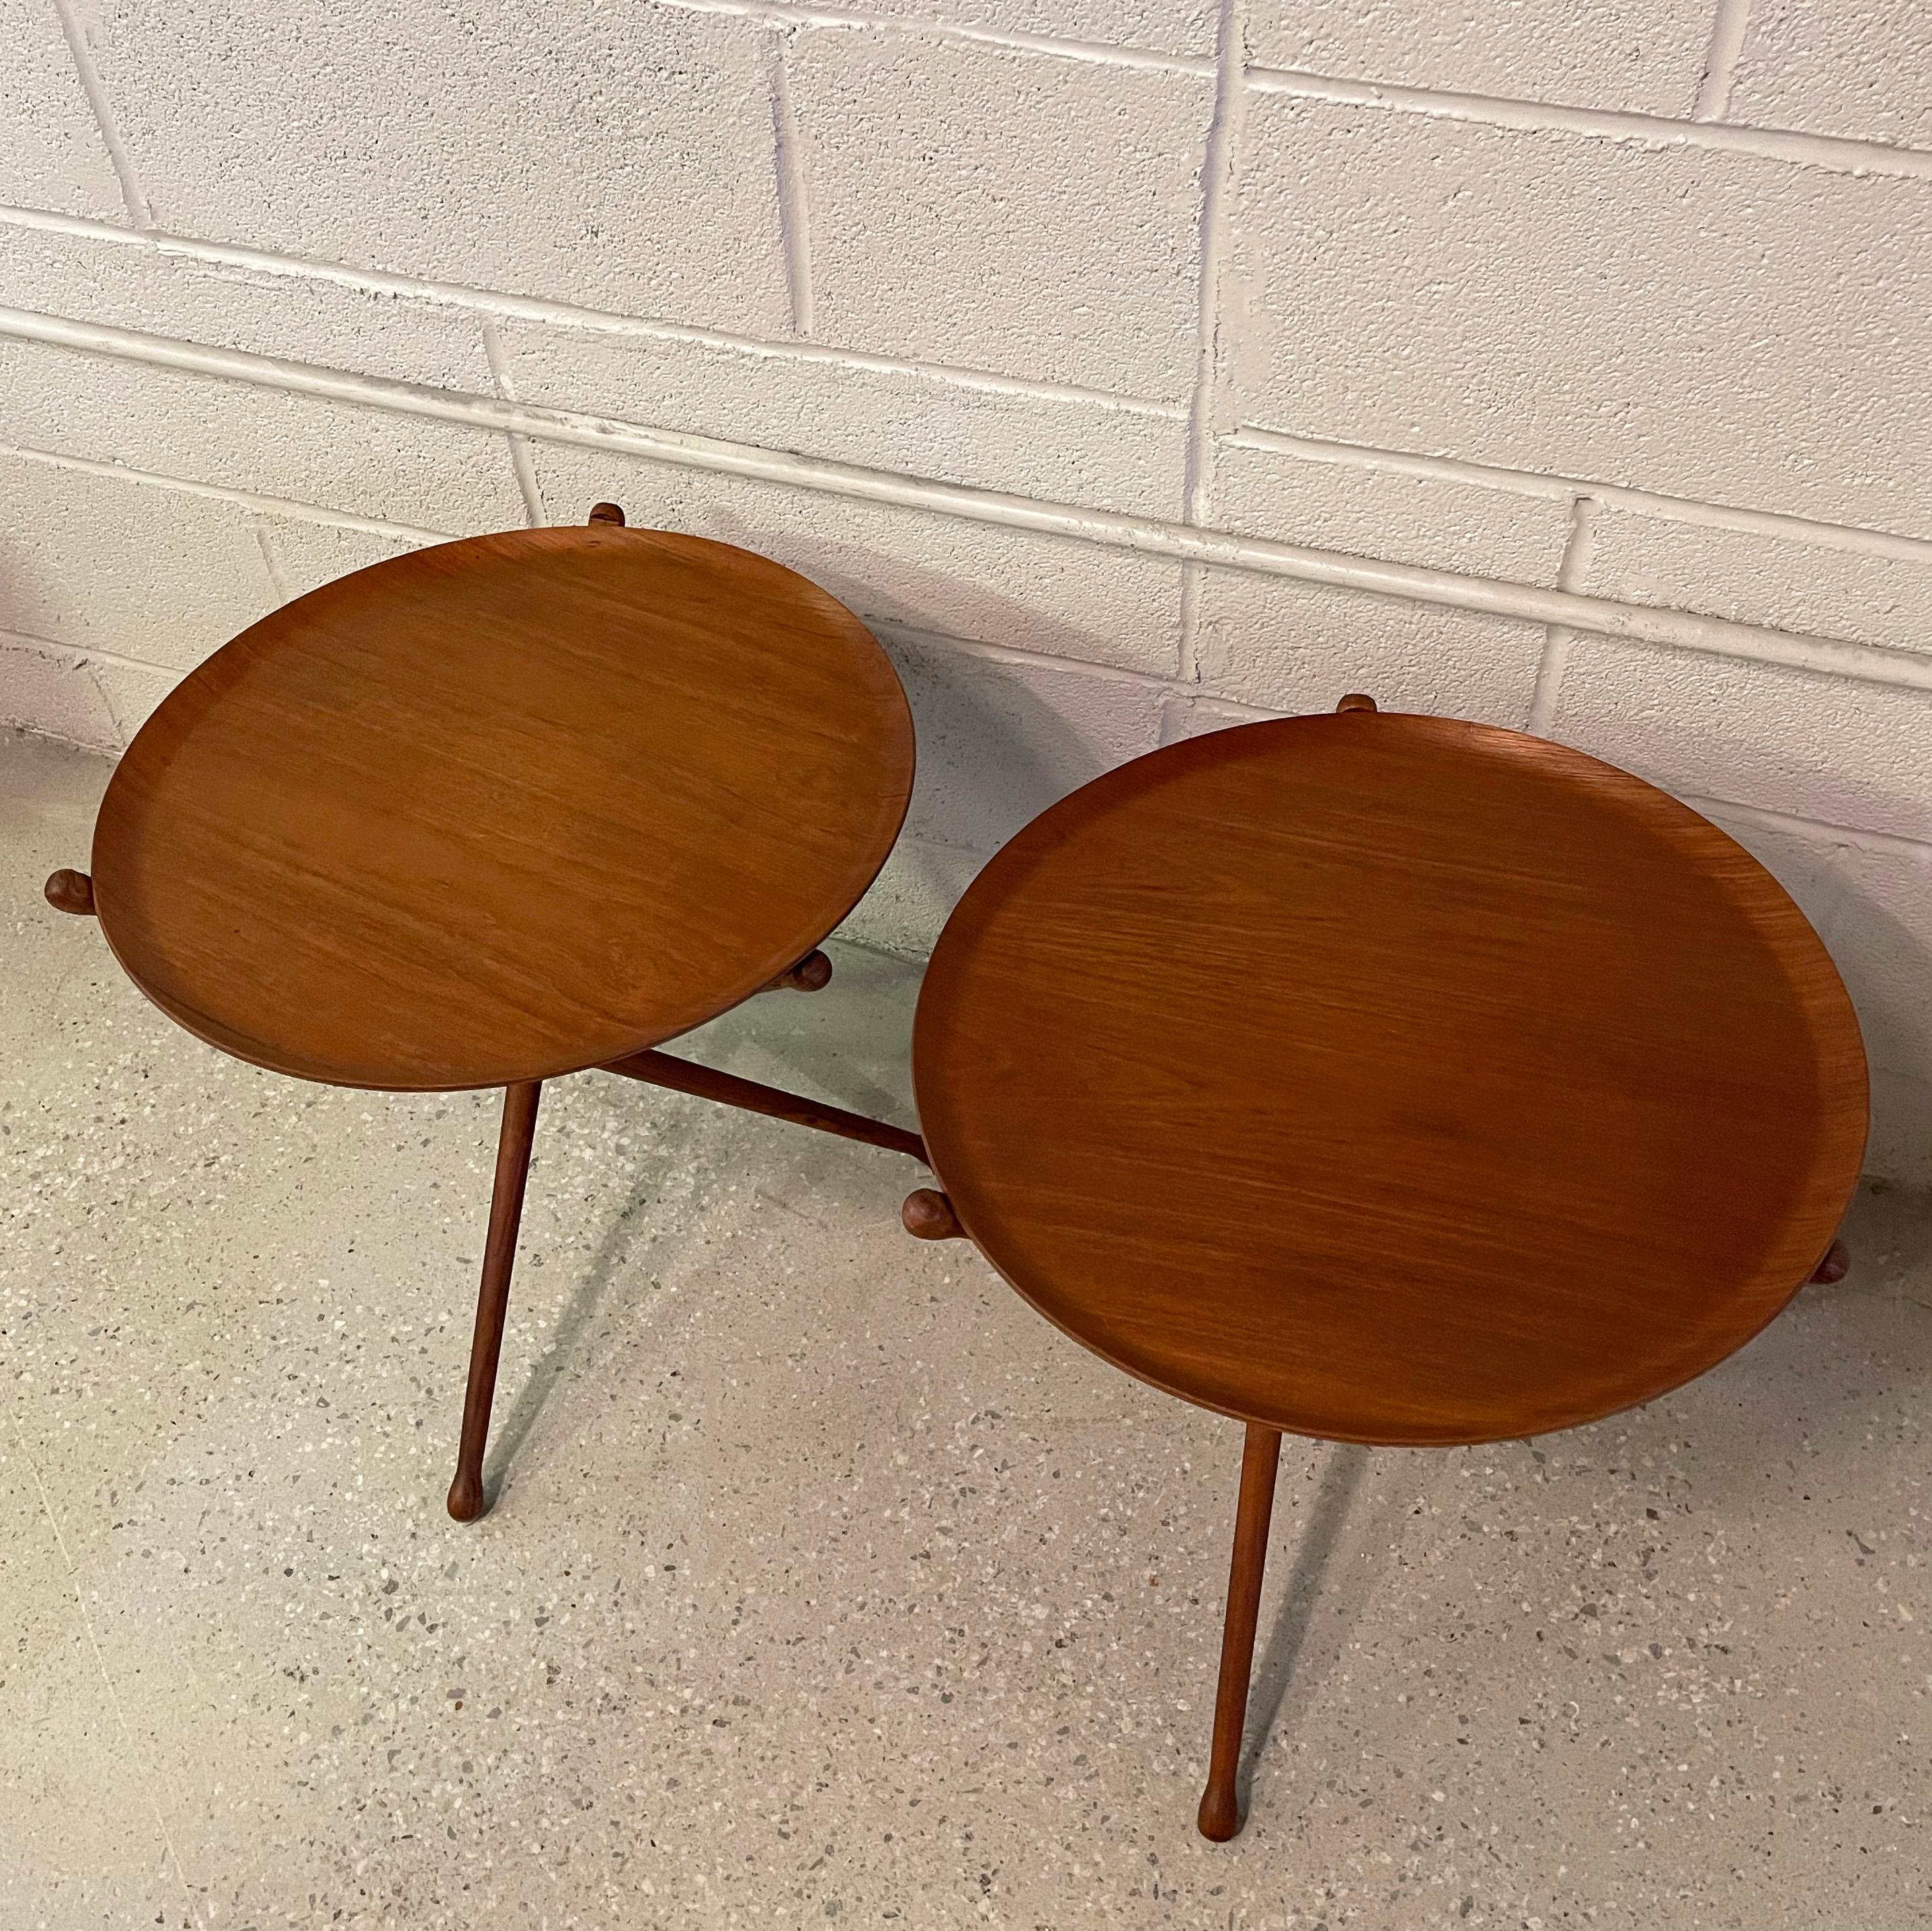 Swedish Pair Of Teak Folding Tray Tables By Nils Trautner For Ary Nybro, Sweden For Sale